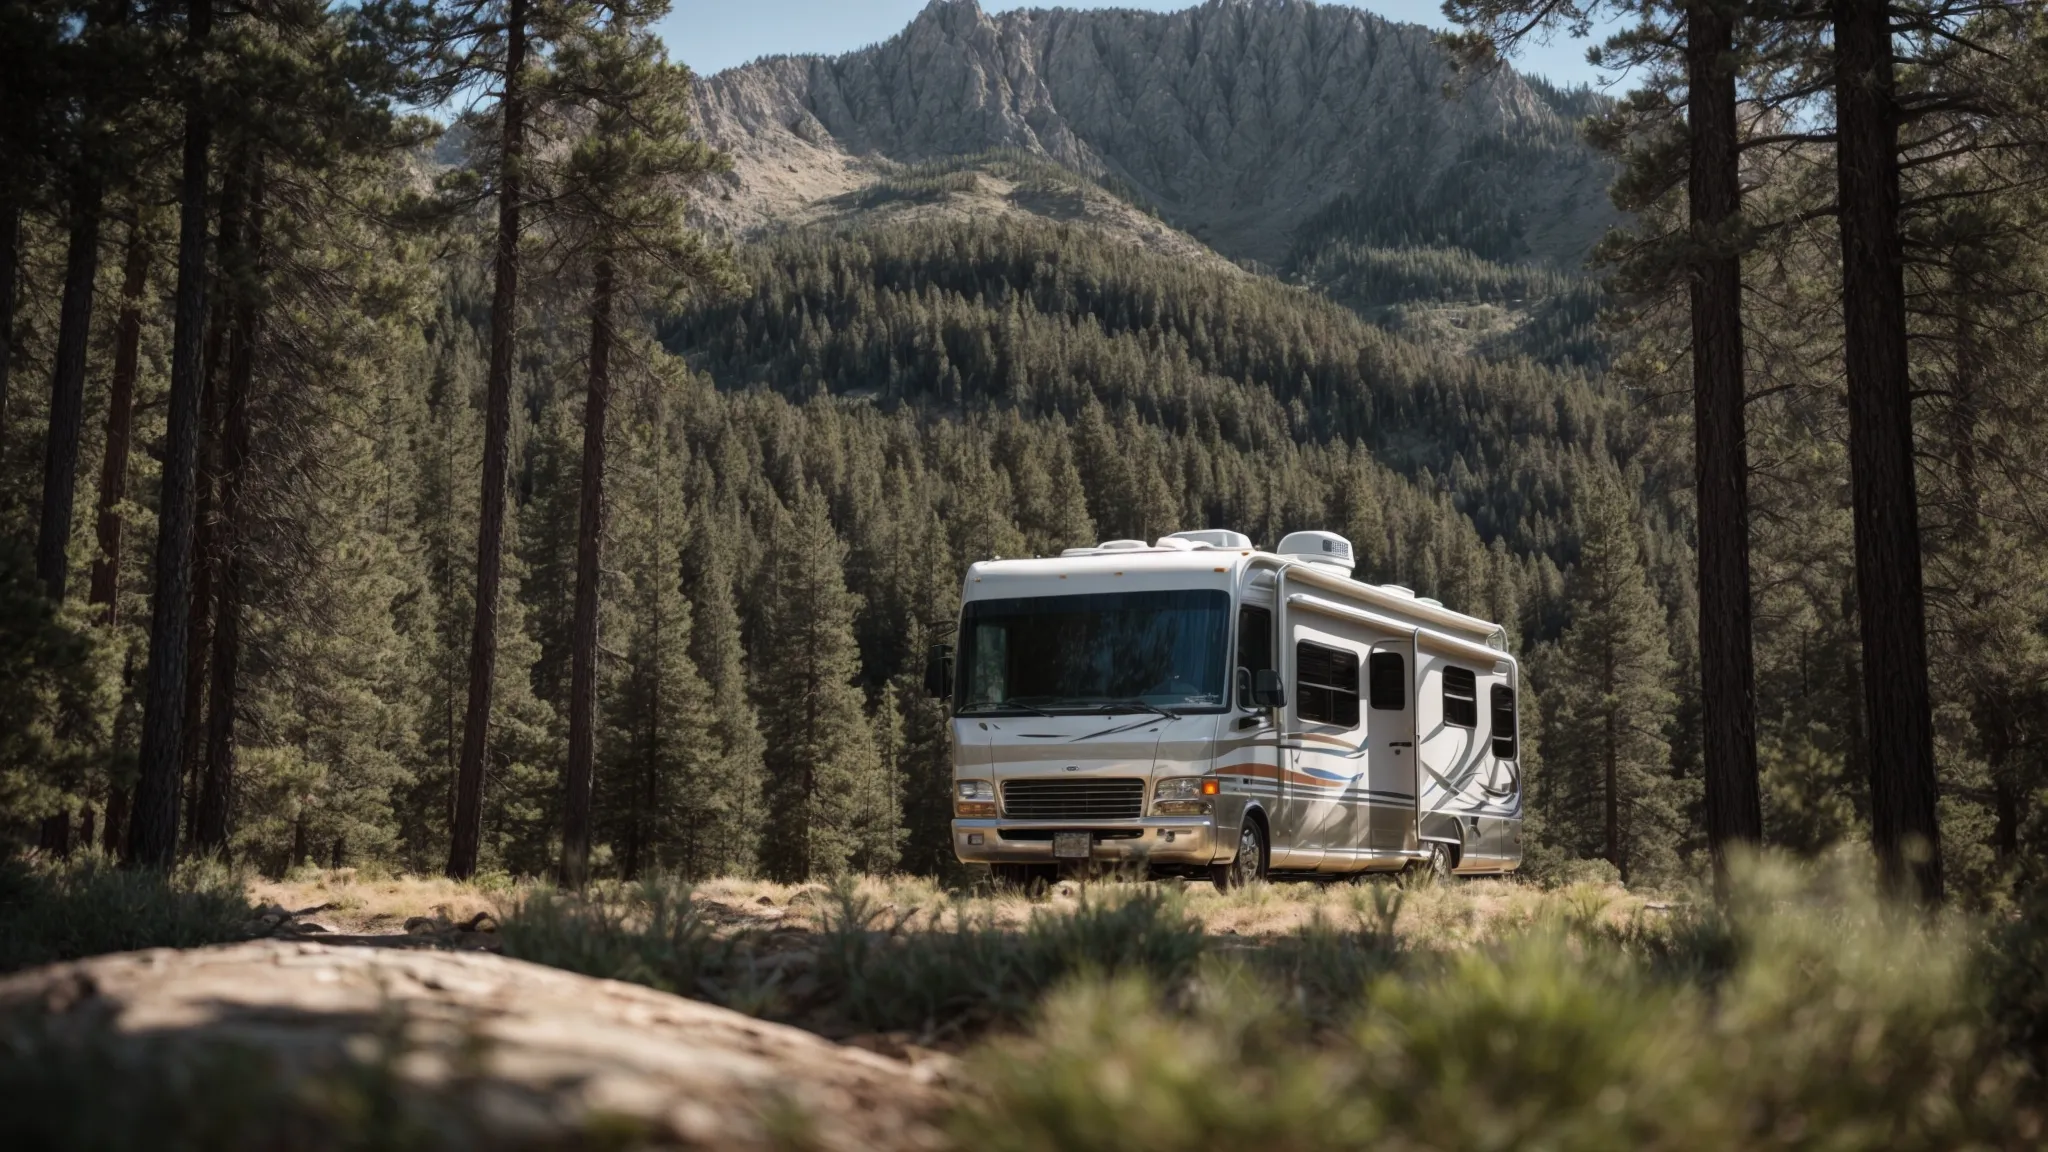 an rv nestled among pines with a mountain backdrop under a clear blue sky.